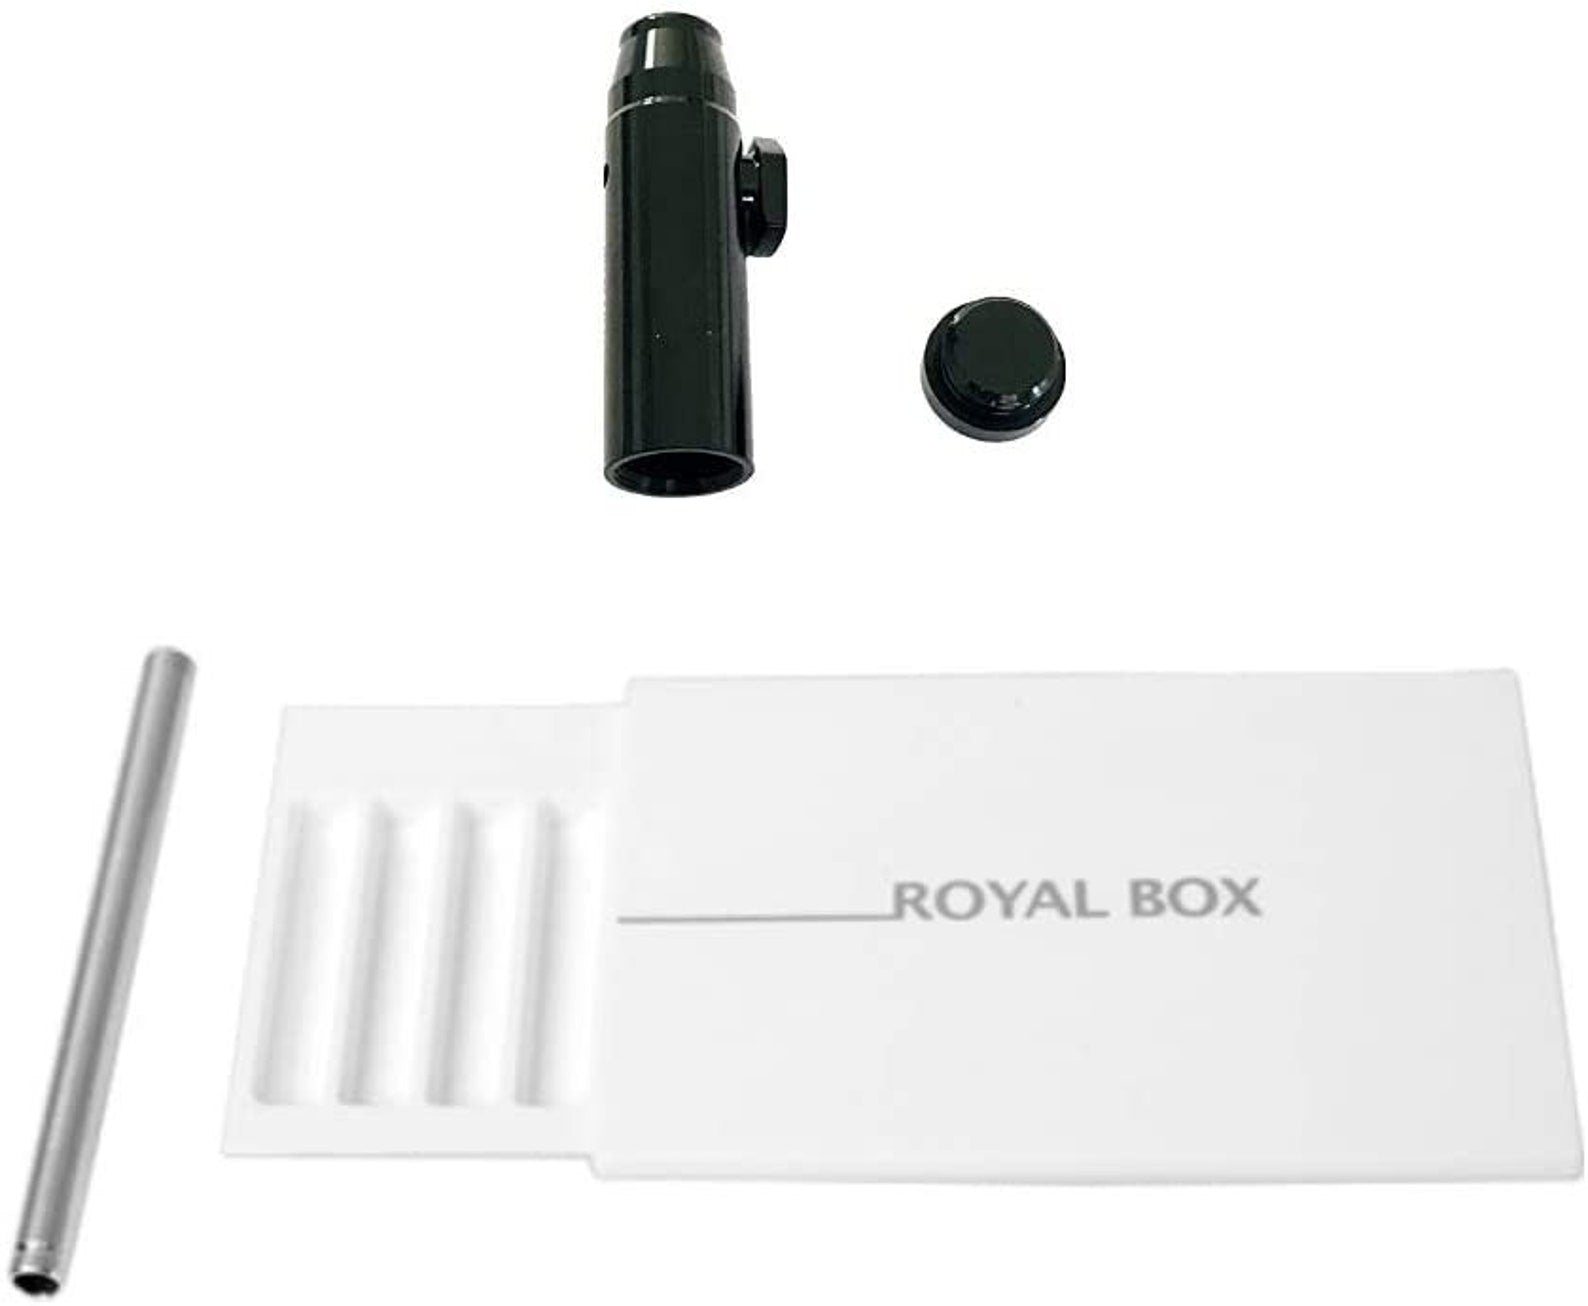 Royal Box including integrated tube plus free dispenser for snuff Sniff  Snuff dispenser for on the go in black